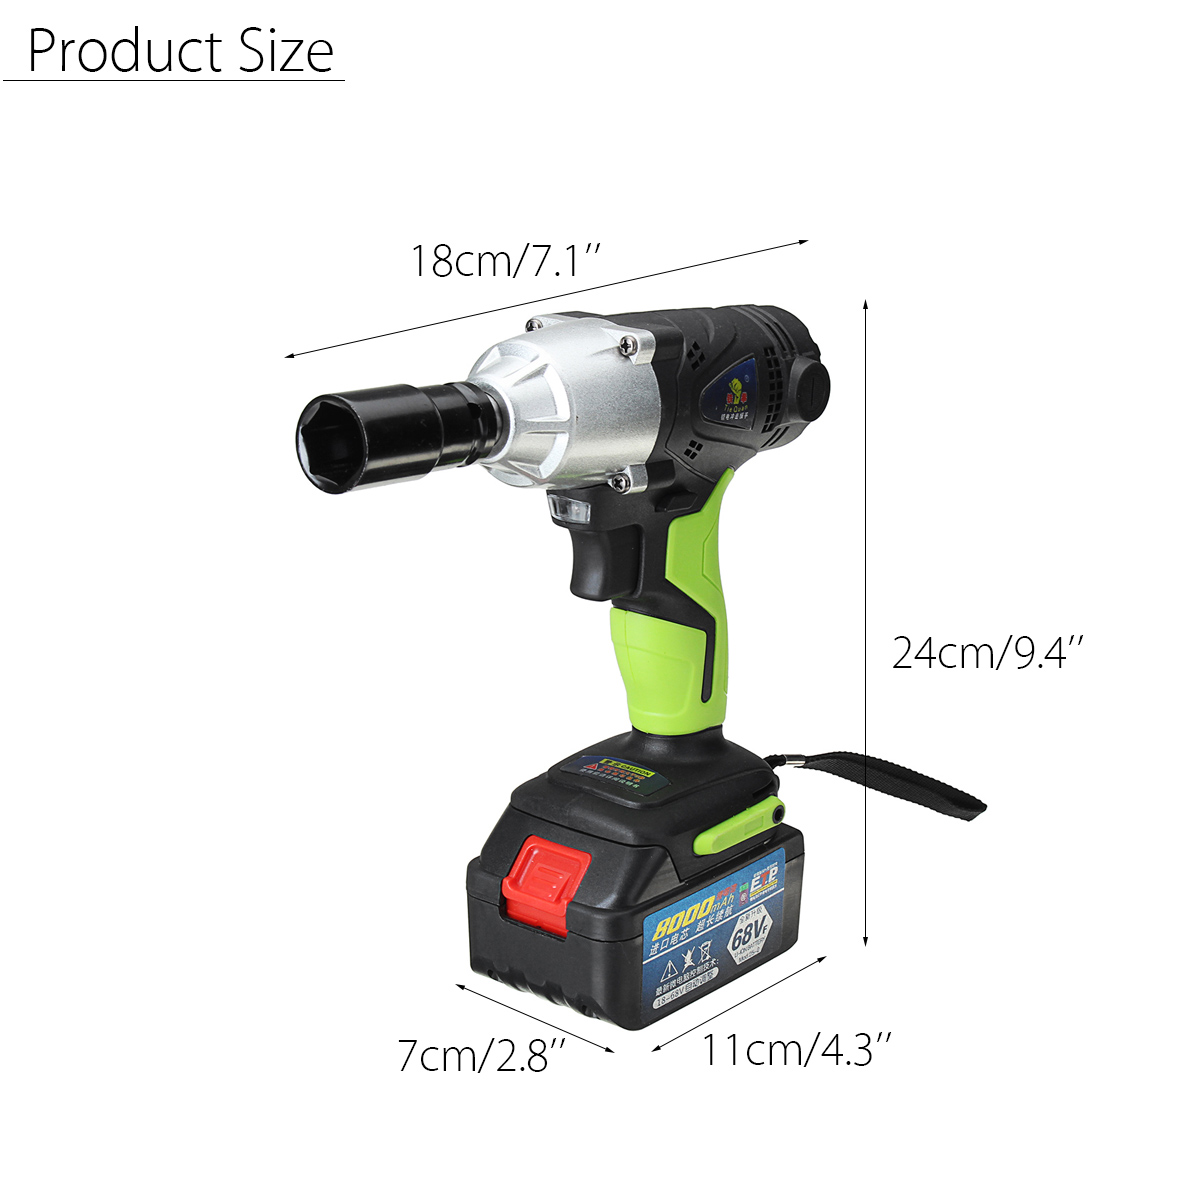 80Ah-68V-Cordless-Impact-Wrench-Li-ion-Power-Driver-Drill-Power-Wrench-Tools-1-Charger-2-Batteries-1286260-5